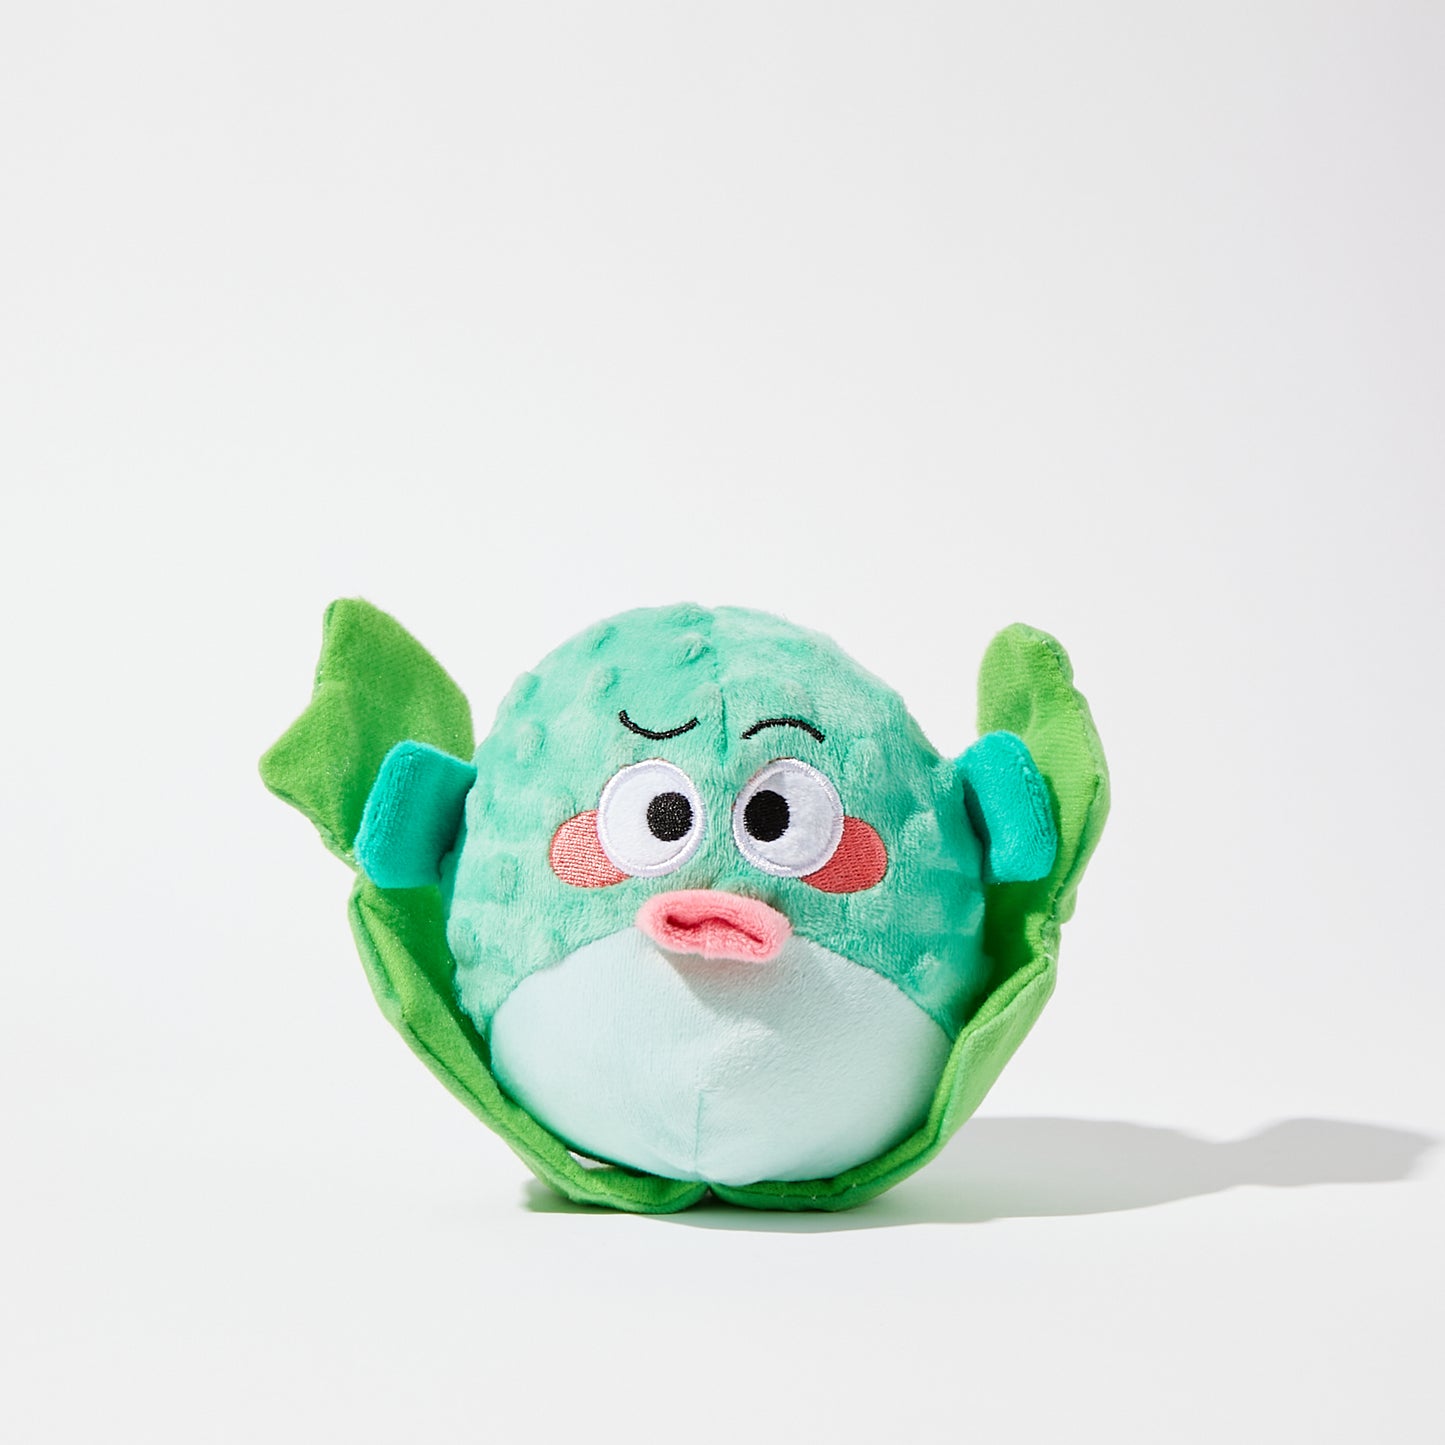 Plush and ball 2 in 1 Fish